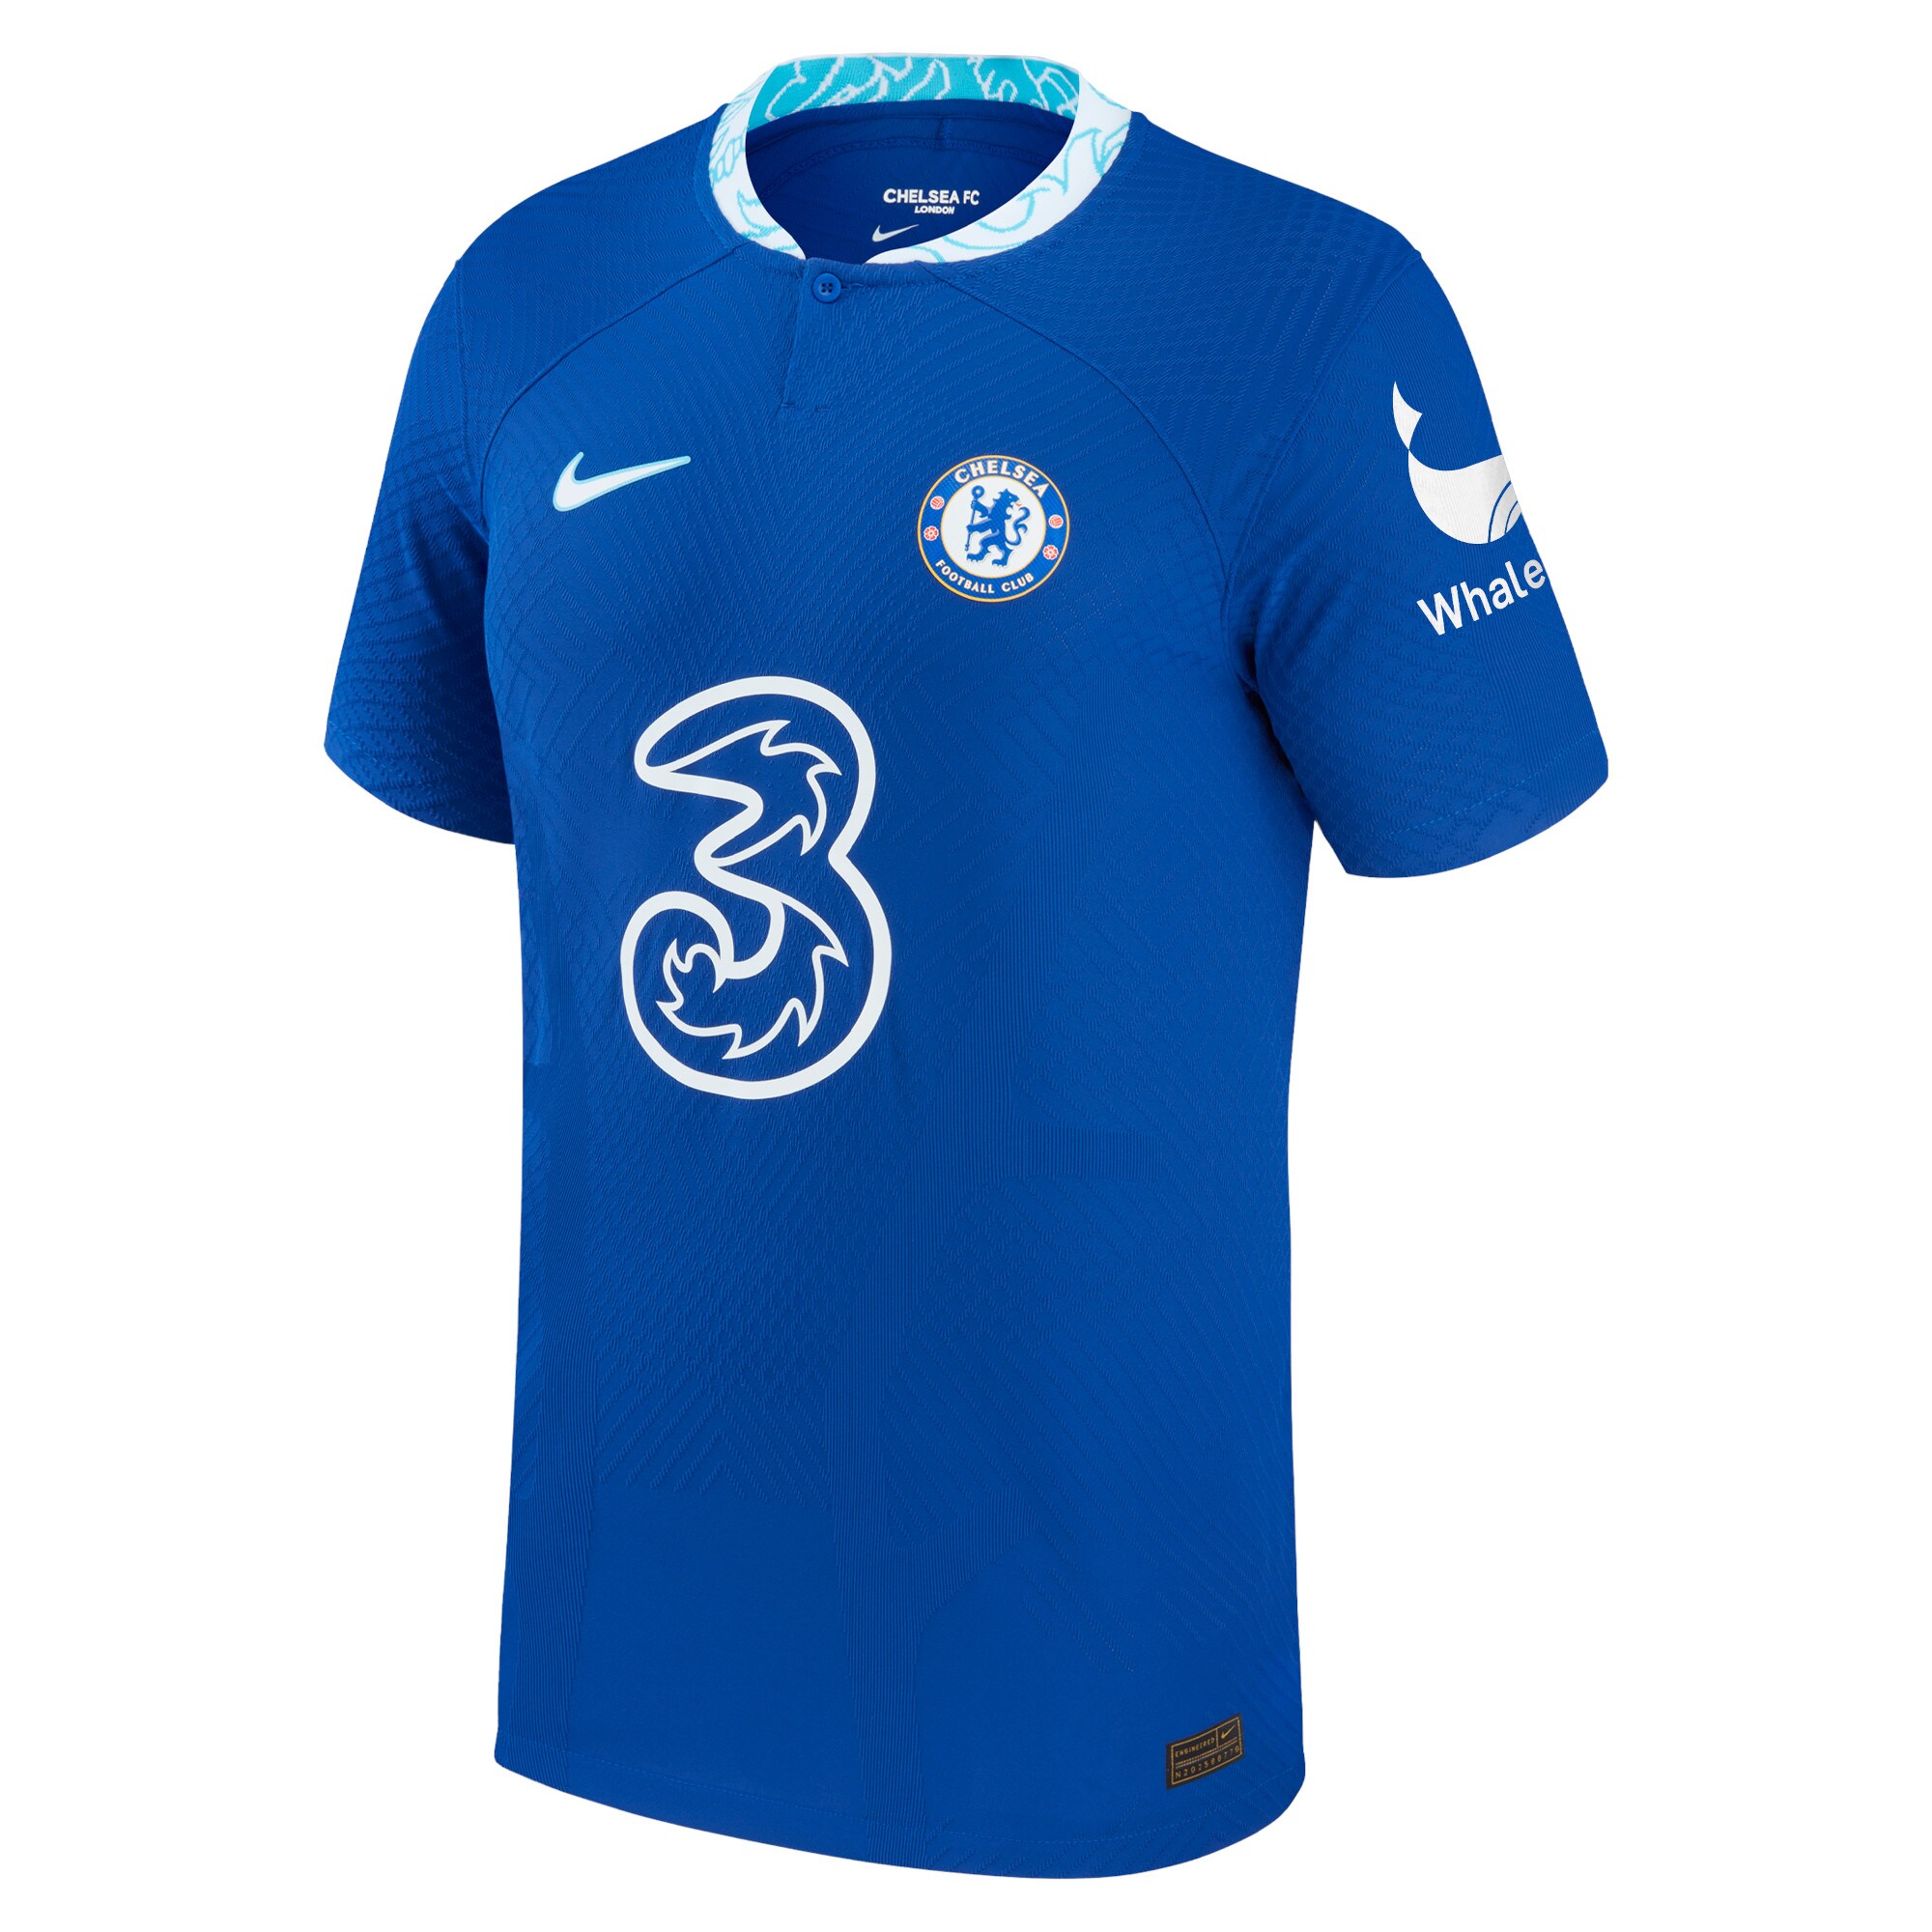 Chelsea Home Vapor Match Shirt 2022-23 with Marcos A. 3 printing